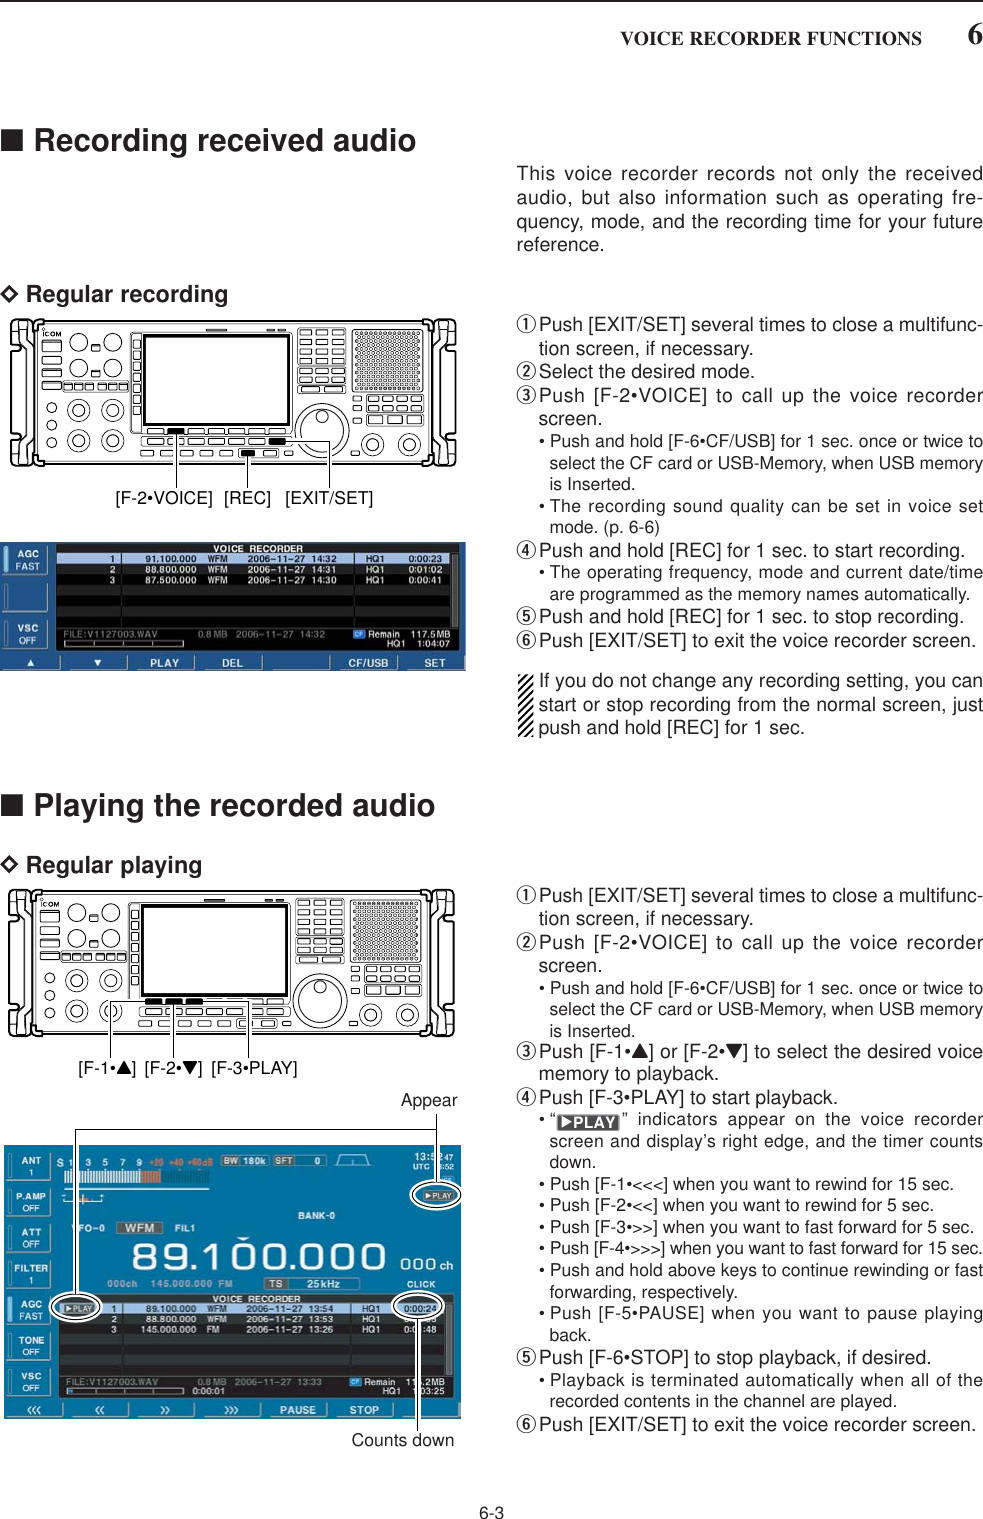 6-3■Recording received audioThis voice recorder records not only the receivedaudio, but also information such as operating fre-quency, mode, and the recording time for your futurereference.DRegular recordingqPush [EXIT/SET] several times to close a multifunc-tion screen, if necessary.wSelect the desired mode.ePush [F-2•VOICE] to call up the voice recorderscreen.• Push and hold [F-6•CF/USB] for 1 sec. once or twice toselect the CF card or USB-Memory, when USB memoryis Inserted.• The recording sound quality can be set in voice setmode. (p. 6-6)rPush and hold [REC] for 1 sec. to start recording.• The operating frequency, mode and current date/timeare programmed as the memory names automatically.tPush and hold [REC] for 1 sec. to stop recording.yPush [EXIT/SET] to exit the voice recorder screen.If you do not change any recording setting, you canstart or stop recording from the normal screen, justpush and hold [REC] for 1 sec.■Playing the recorded audioDRegular playingqPush [EXIT/SET] several times to close a multifunc-tion screen, if necessary.wPush [F-2•VOICE] to call up the voice recorderscreen.• Push and hold [F-6•CF/USB] for 1 sec. once or twice toselect the CF card or USB-Memory, when USB memoryis Inserted.ePush [F-1•Y] or [F-2•Z] to select the desired voicememory to playback.rPush [F-3•PLAY] to start playback.• “ ” indicators appear on the voice recorderscreen and display’s right edge, and the timer countsdown.• Push [F-1•&lt;&lt;&lt;] when you want to rewind for 15 sec.• Push [F-2•&lt;&lt;] when you want to rewind for 5 sec.• Push [F-3•&gt;&gt;] when you want to fast forward for 5 sec.• Push [F-4•&gt;&gt;&gt;] when you want to fast forward for 15 sec.• Push and hold above keys to continue rewinding or fastforwarding, respectively.• Push [F-5•PAUSE] when you want to pause playingback.tPush [F-6•STOP] to stop playback, if desired.• Playback is terminated automatically when all of therecorded contents in the channel are played.yPush [EXIT/SET] to exit the voice recorder screen.≈PLAYAppearCounts down[F-1•Y] [F-2•Z] [F-3•PLAY][EXIT/SET][REC][F-2•VOICE]6VOICE RECORDER FUNCTIONS